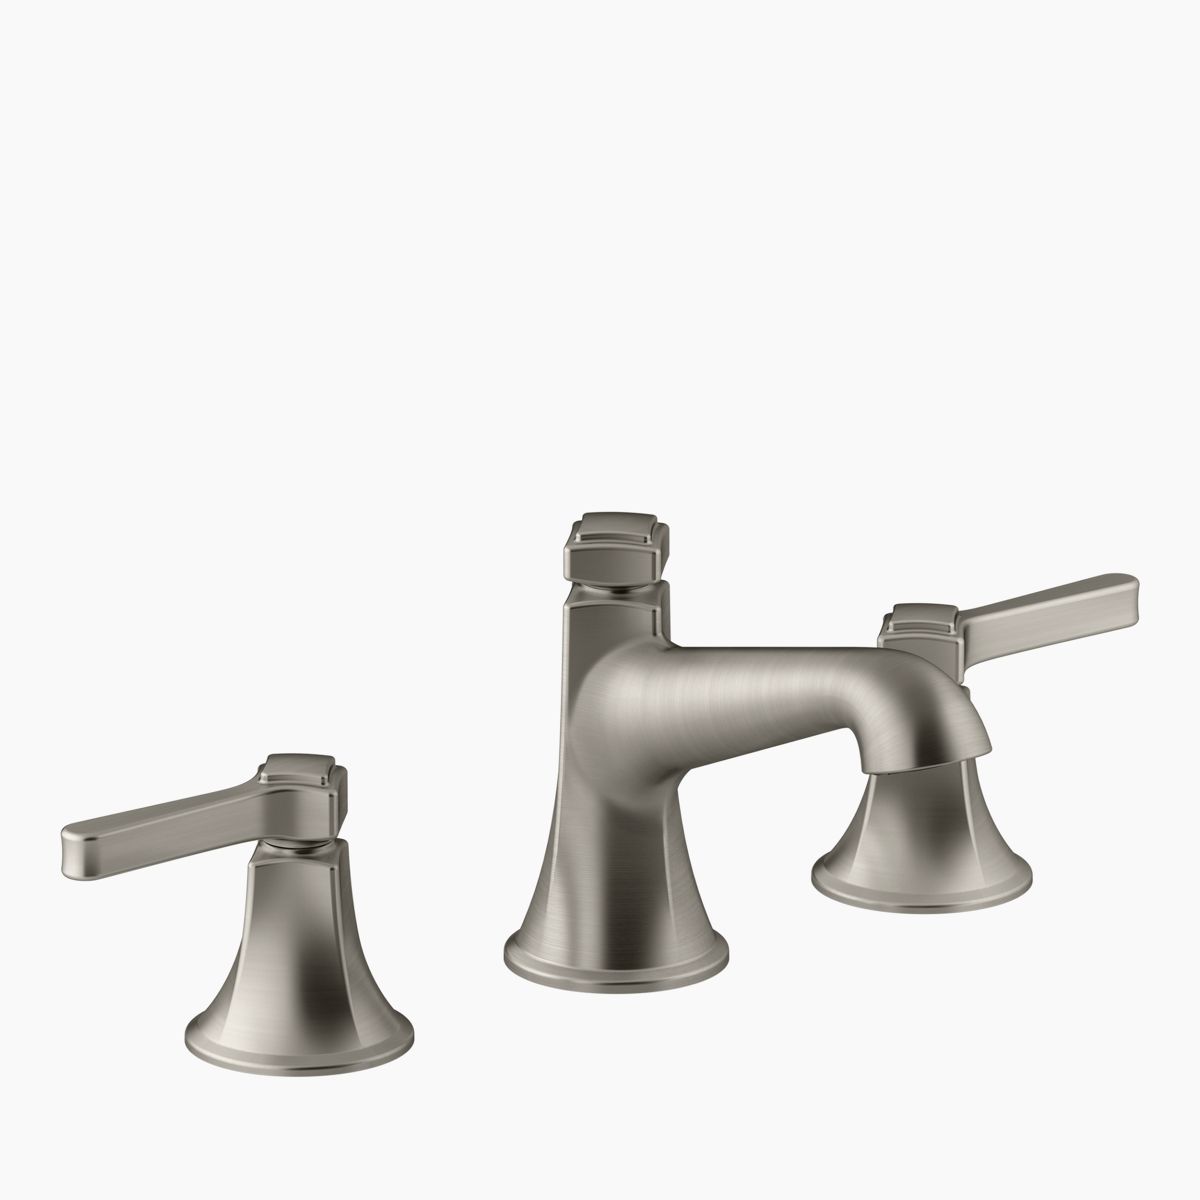 KOHLER K-14406-4 Purist Widespread Sink Faucet with Low Lever Handles